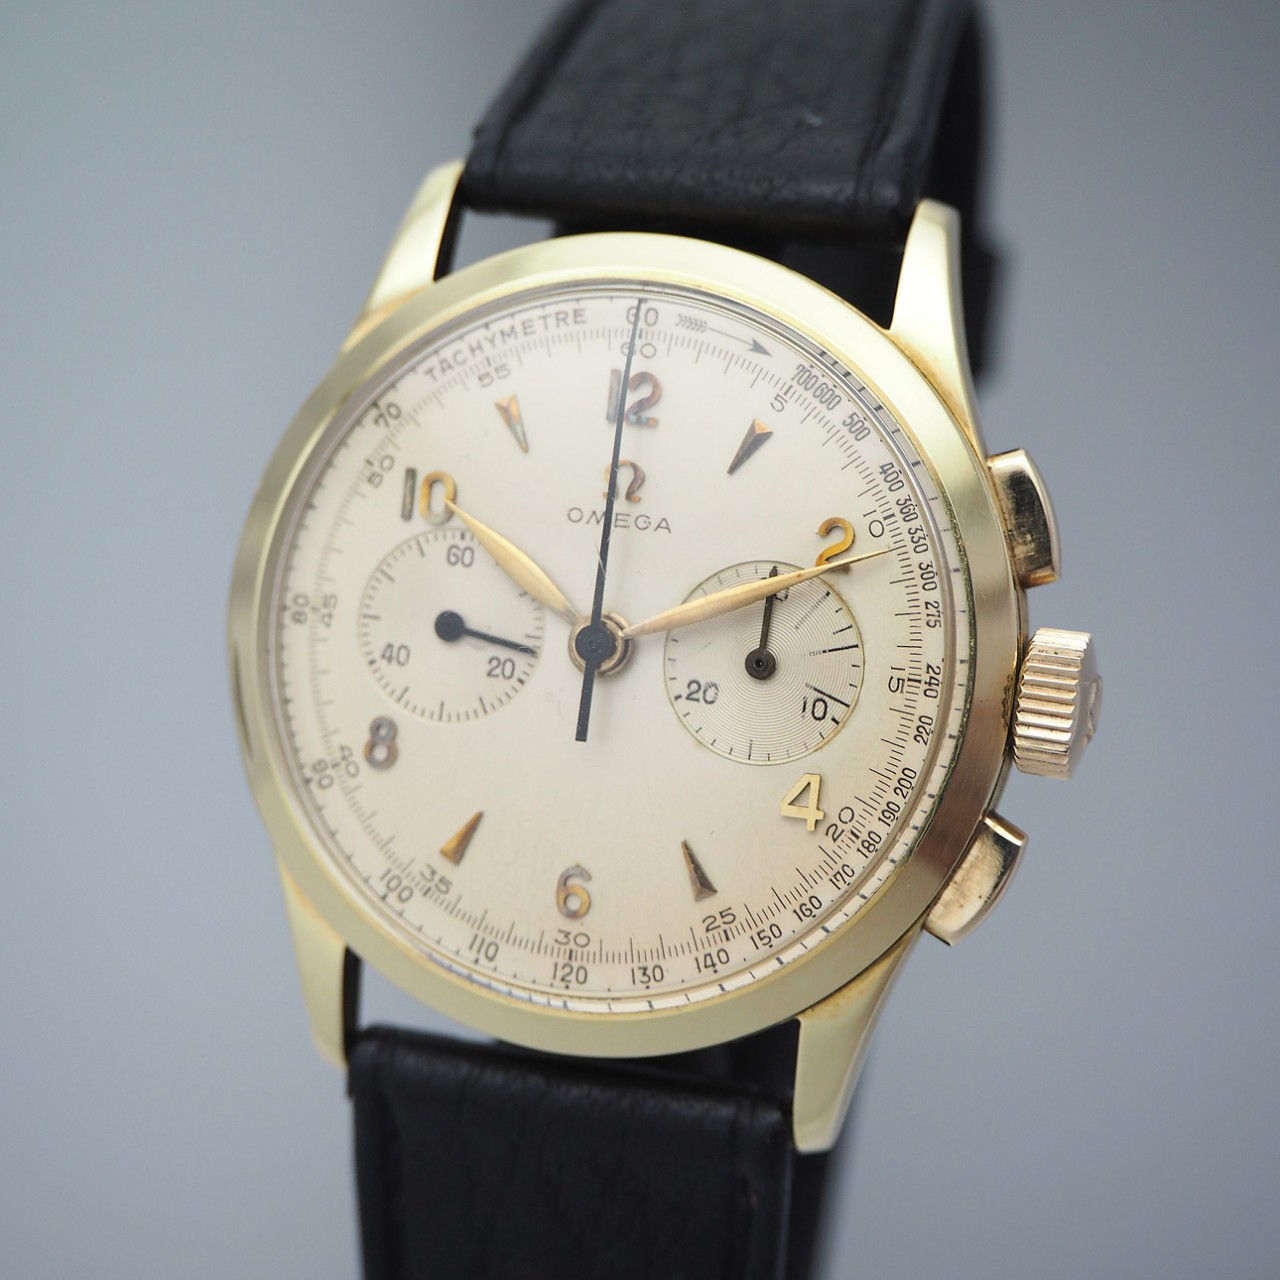 Vintage Omega Chronograph 2872 Cal.320 -Gold 18k/750 from 1956